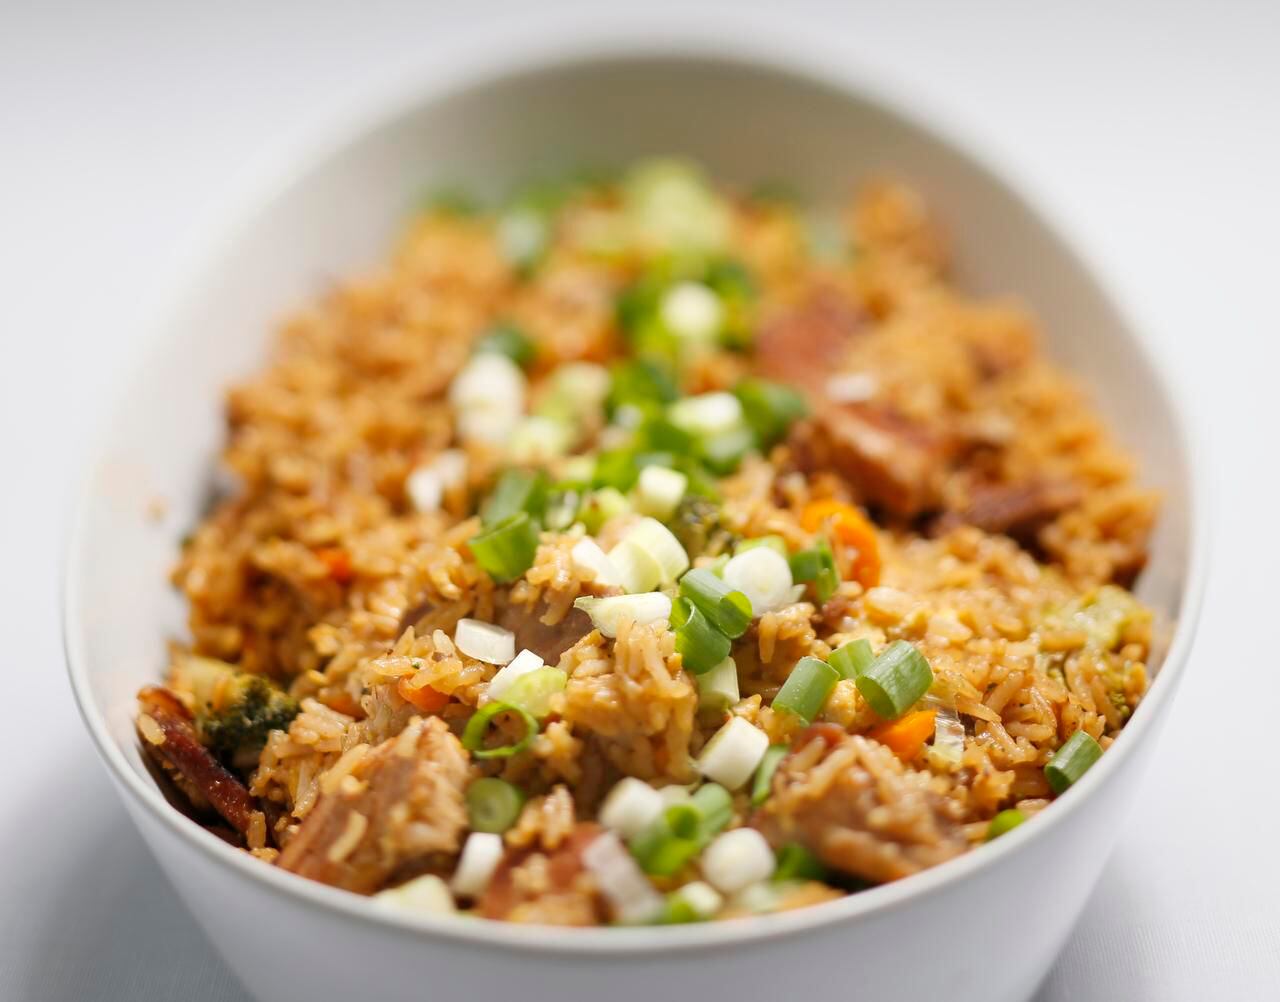 
Pork Fried Rice is a great way to use up whatever leftover vegetables you have on hand.
